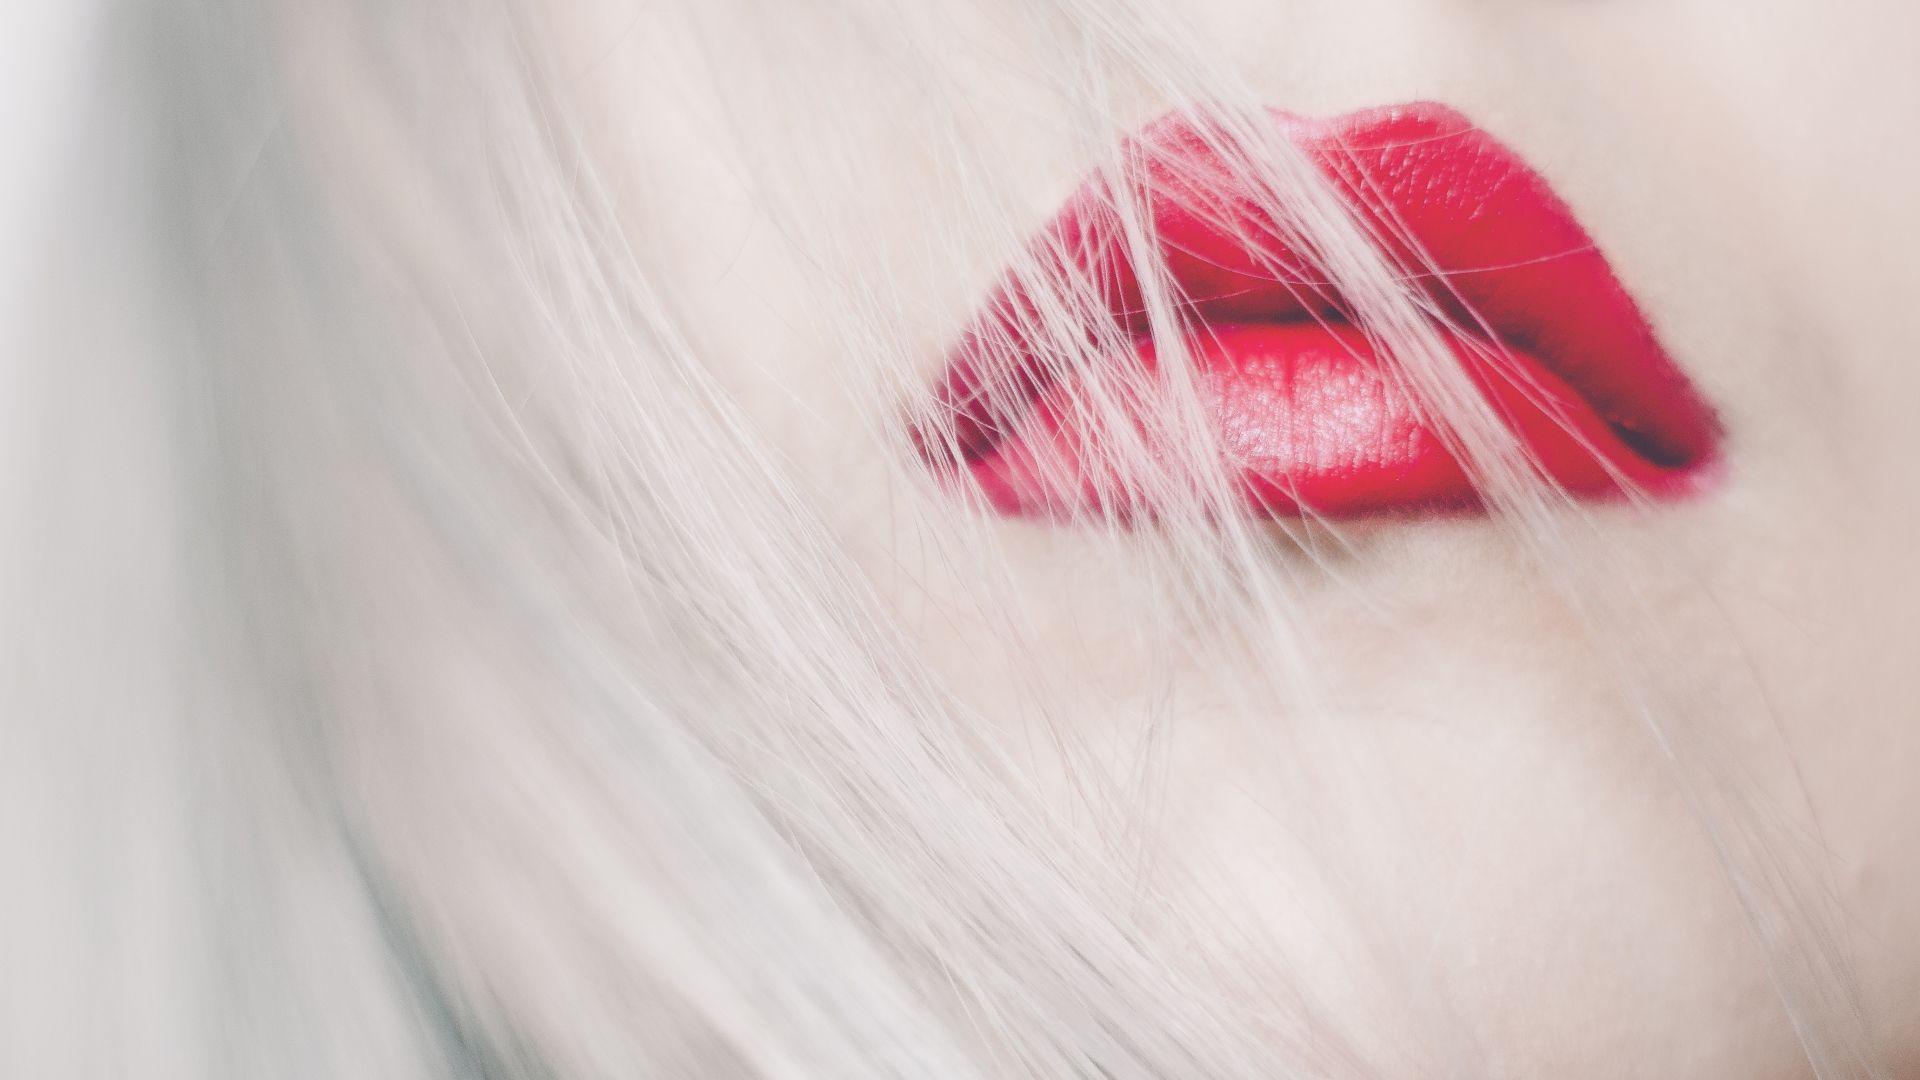 Download Wallpapers 1920x1080 Lips, Red, Lipstick, Hair, Blonde